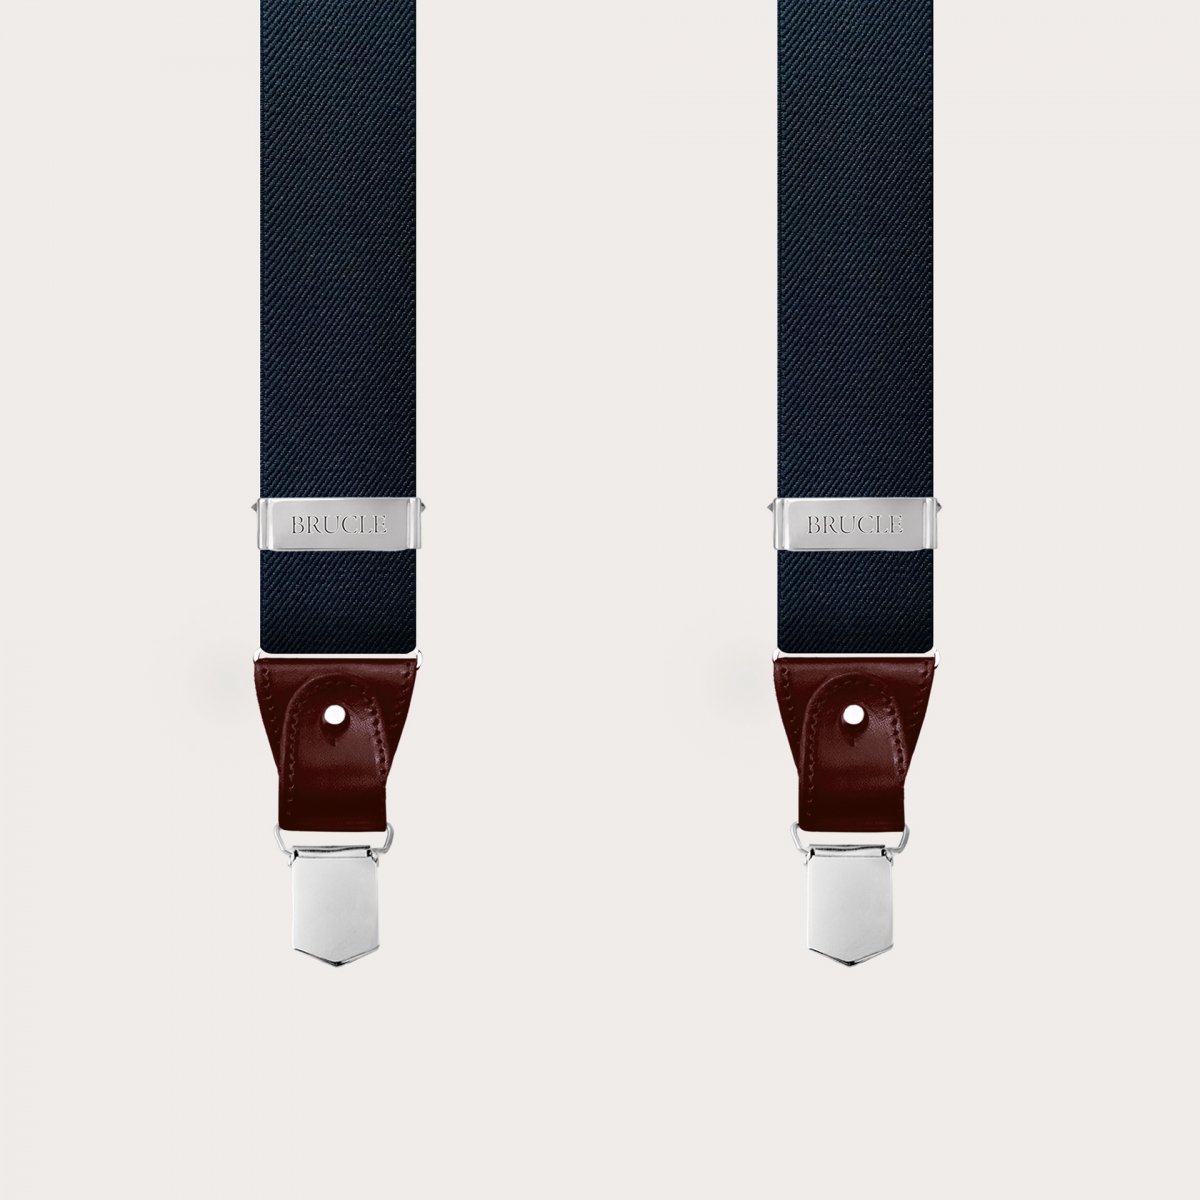 BRUCLE Y-shaped elastic suspenders, blue with burgundy leather parts